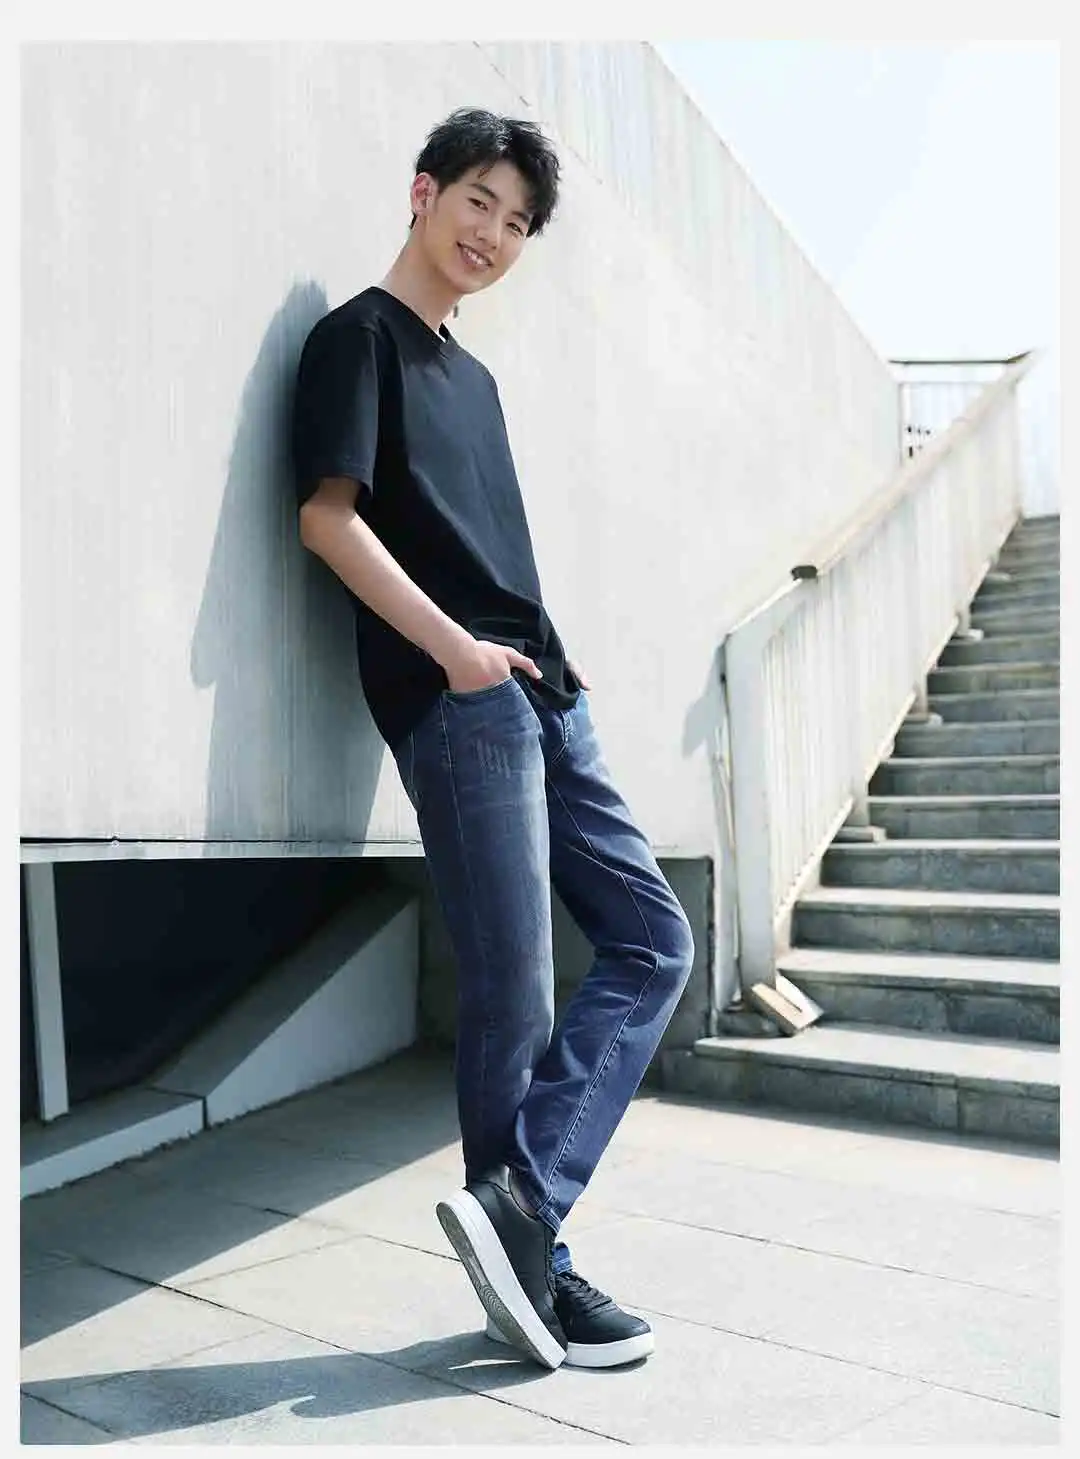 New Xiaomi Mijia Youpin 90 point COOLMAX Slim straight jeans High-elastic fabric cool and dry light and soft for man